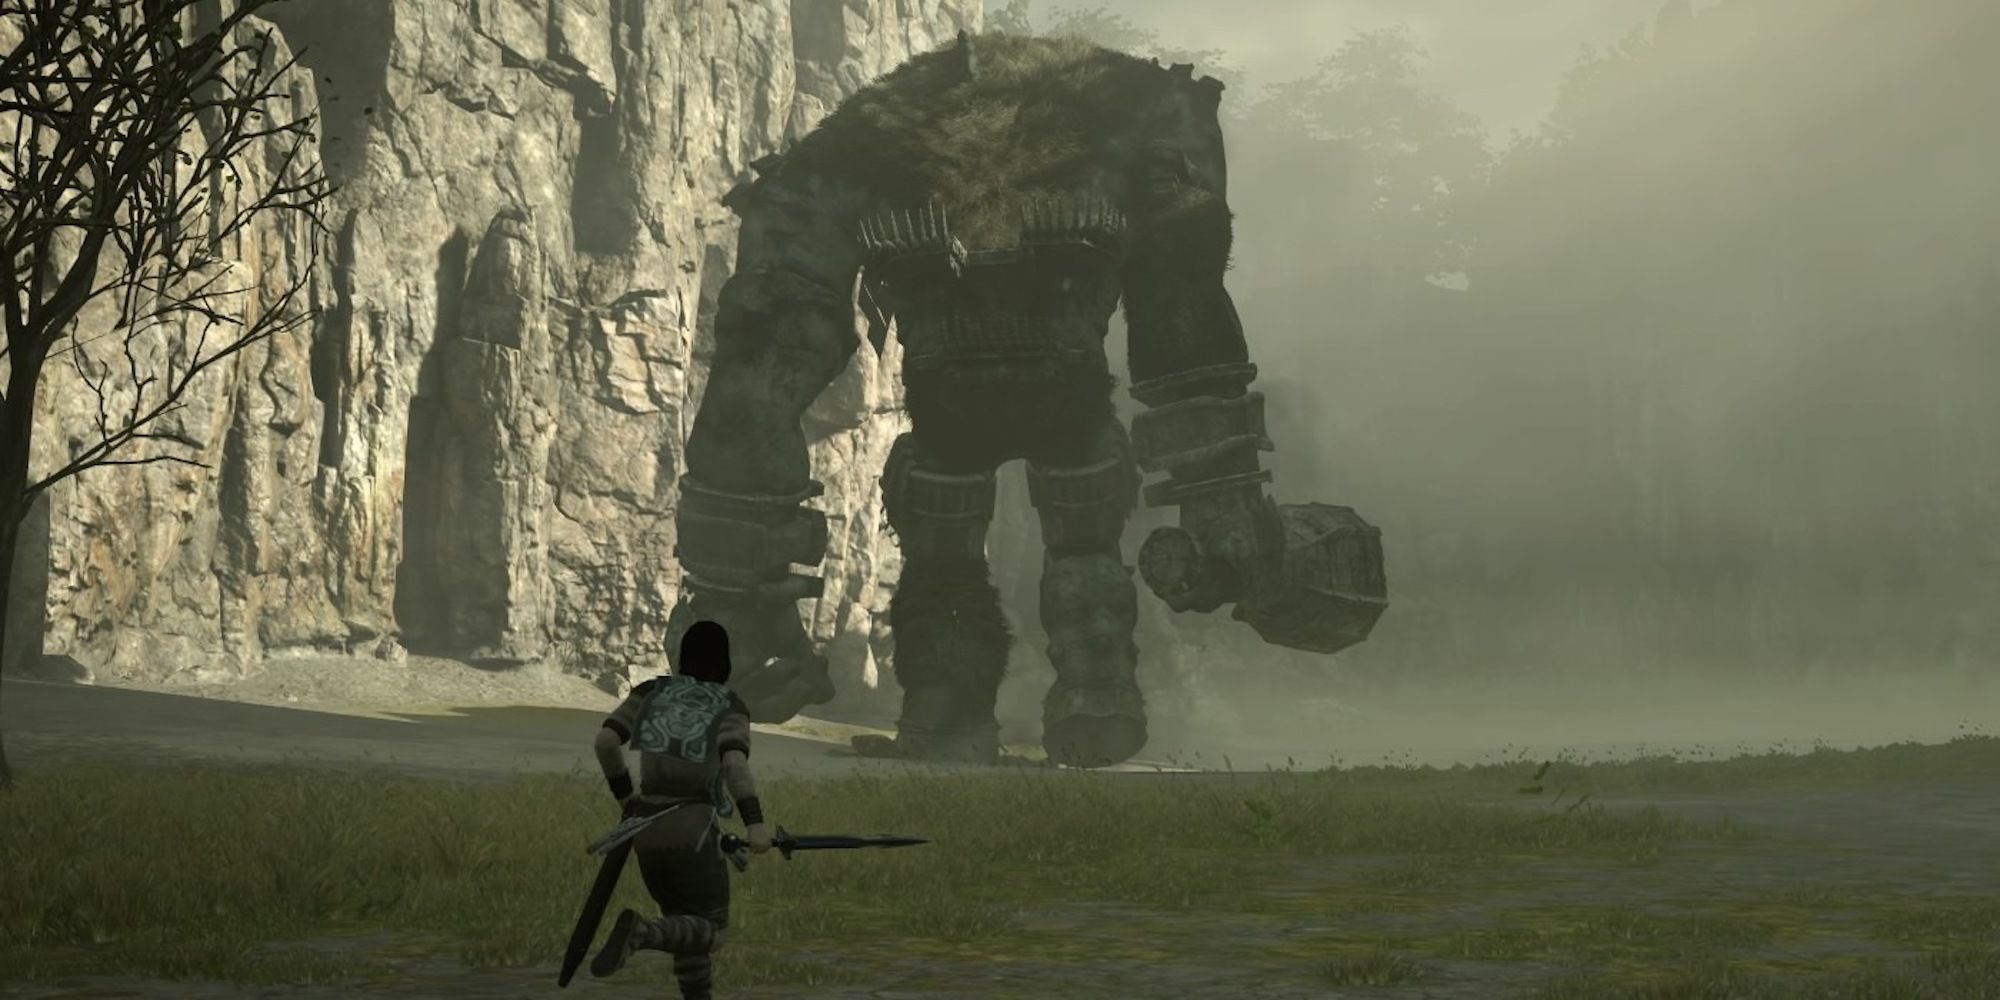 Wanderer chases one of the Colossi through a grassy expanse